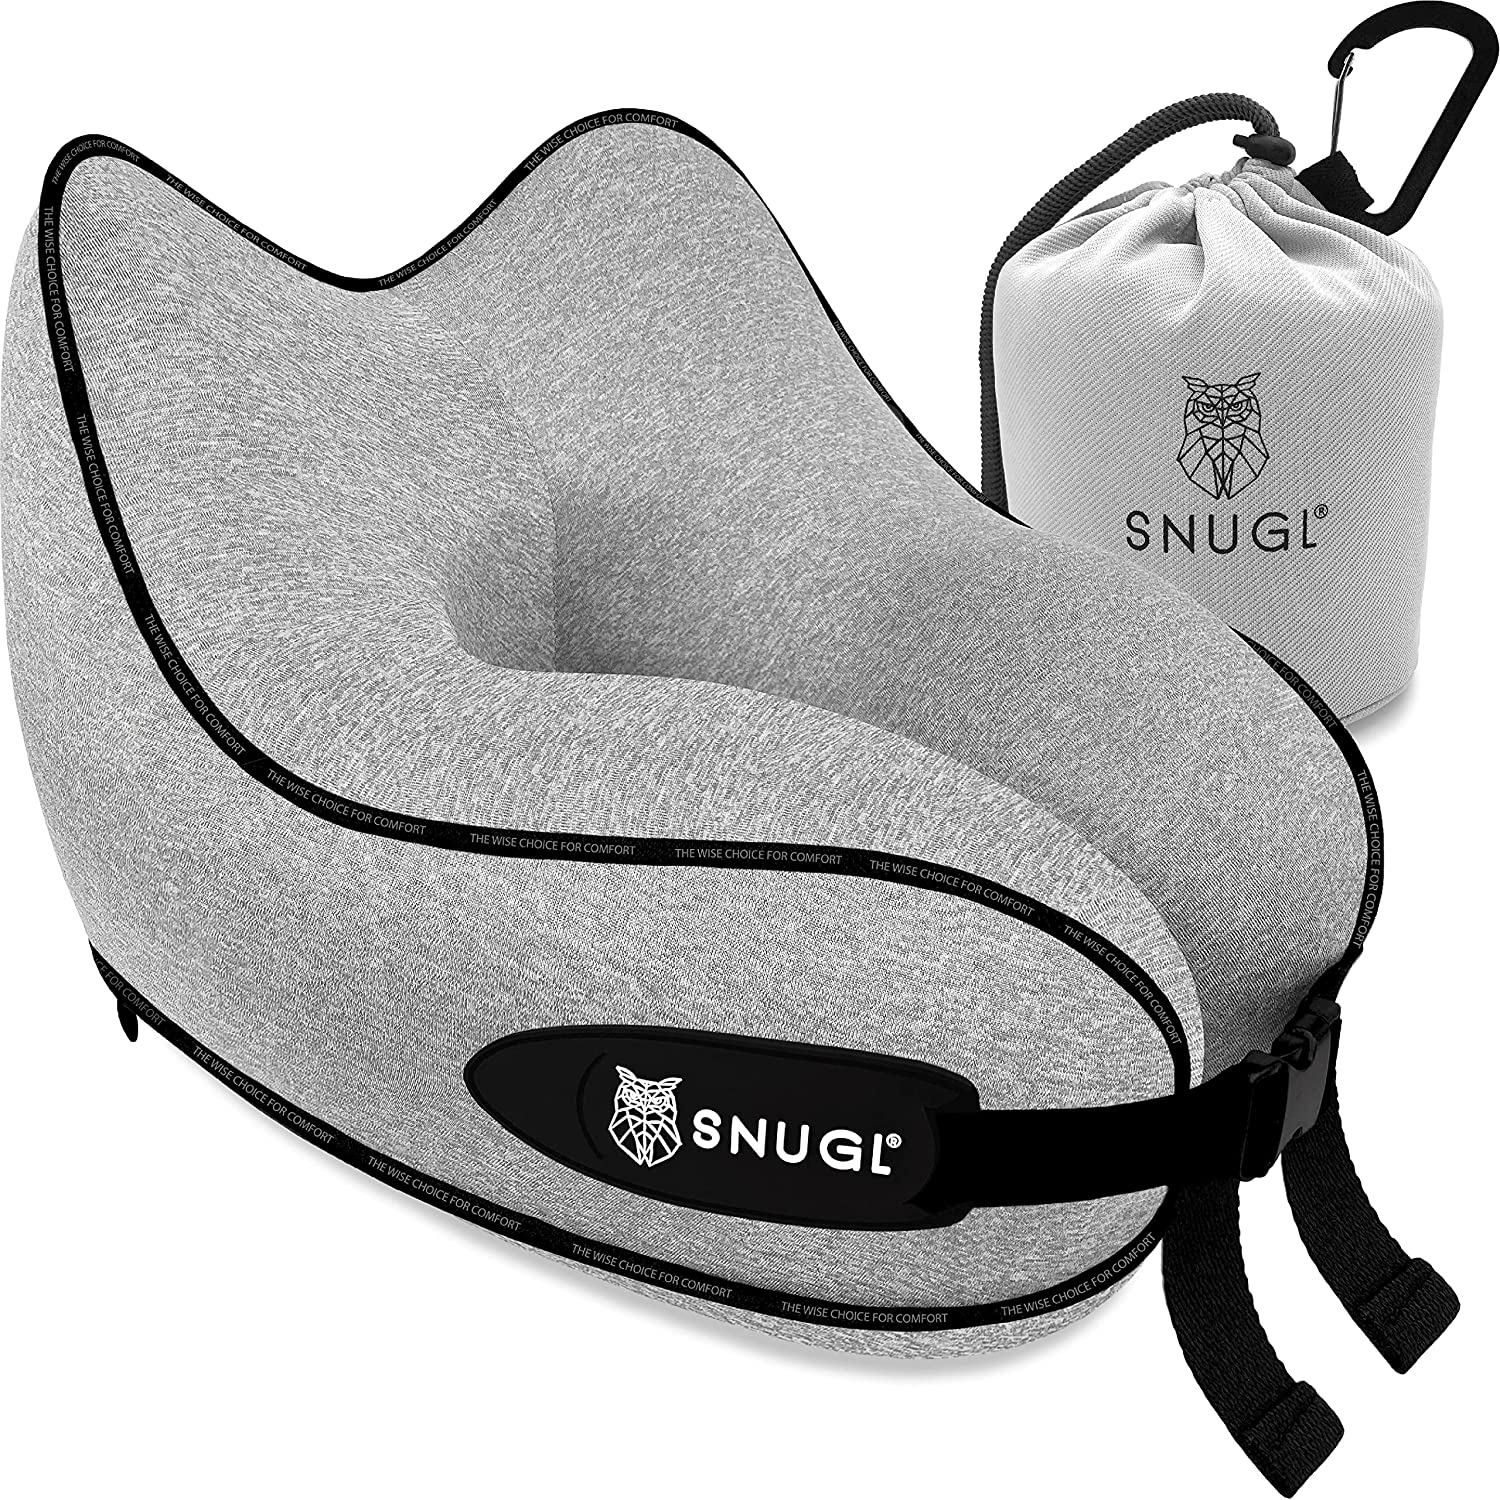 Train or Car Black/Grey - Adult Small SNUGL Travel Pillow Premium Ergonomic Design Memory Foam Cushion Head Carry Bag with Carabiner Clip Included Neck & Chin Support for Airplane 